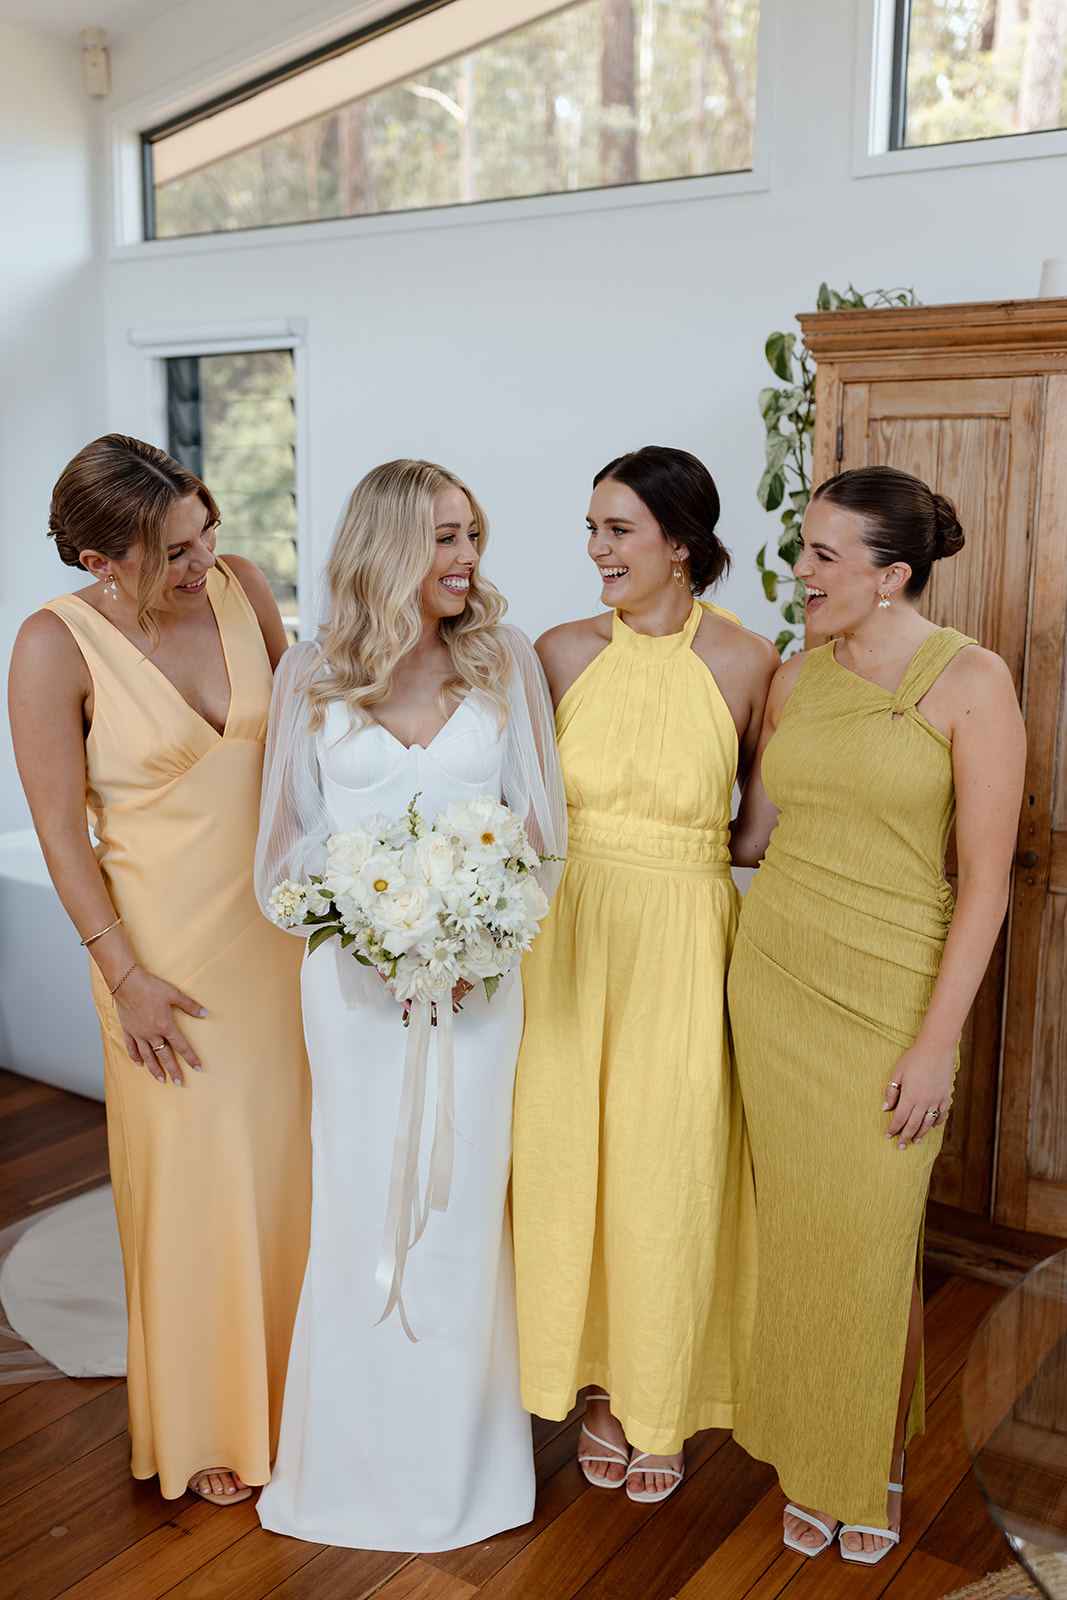 Bride with her bridesmaids at the wedding in the South Coast Bawley Vale Estate